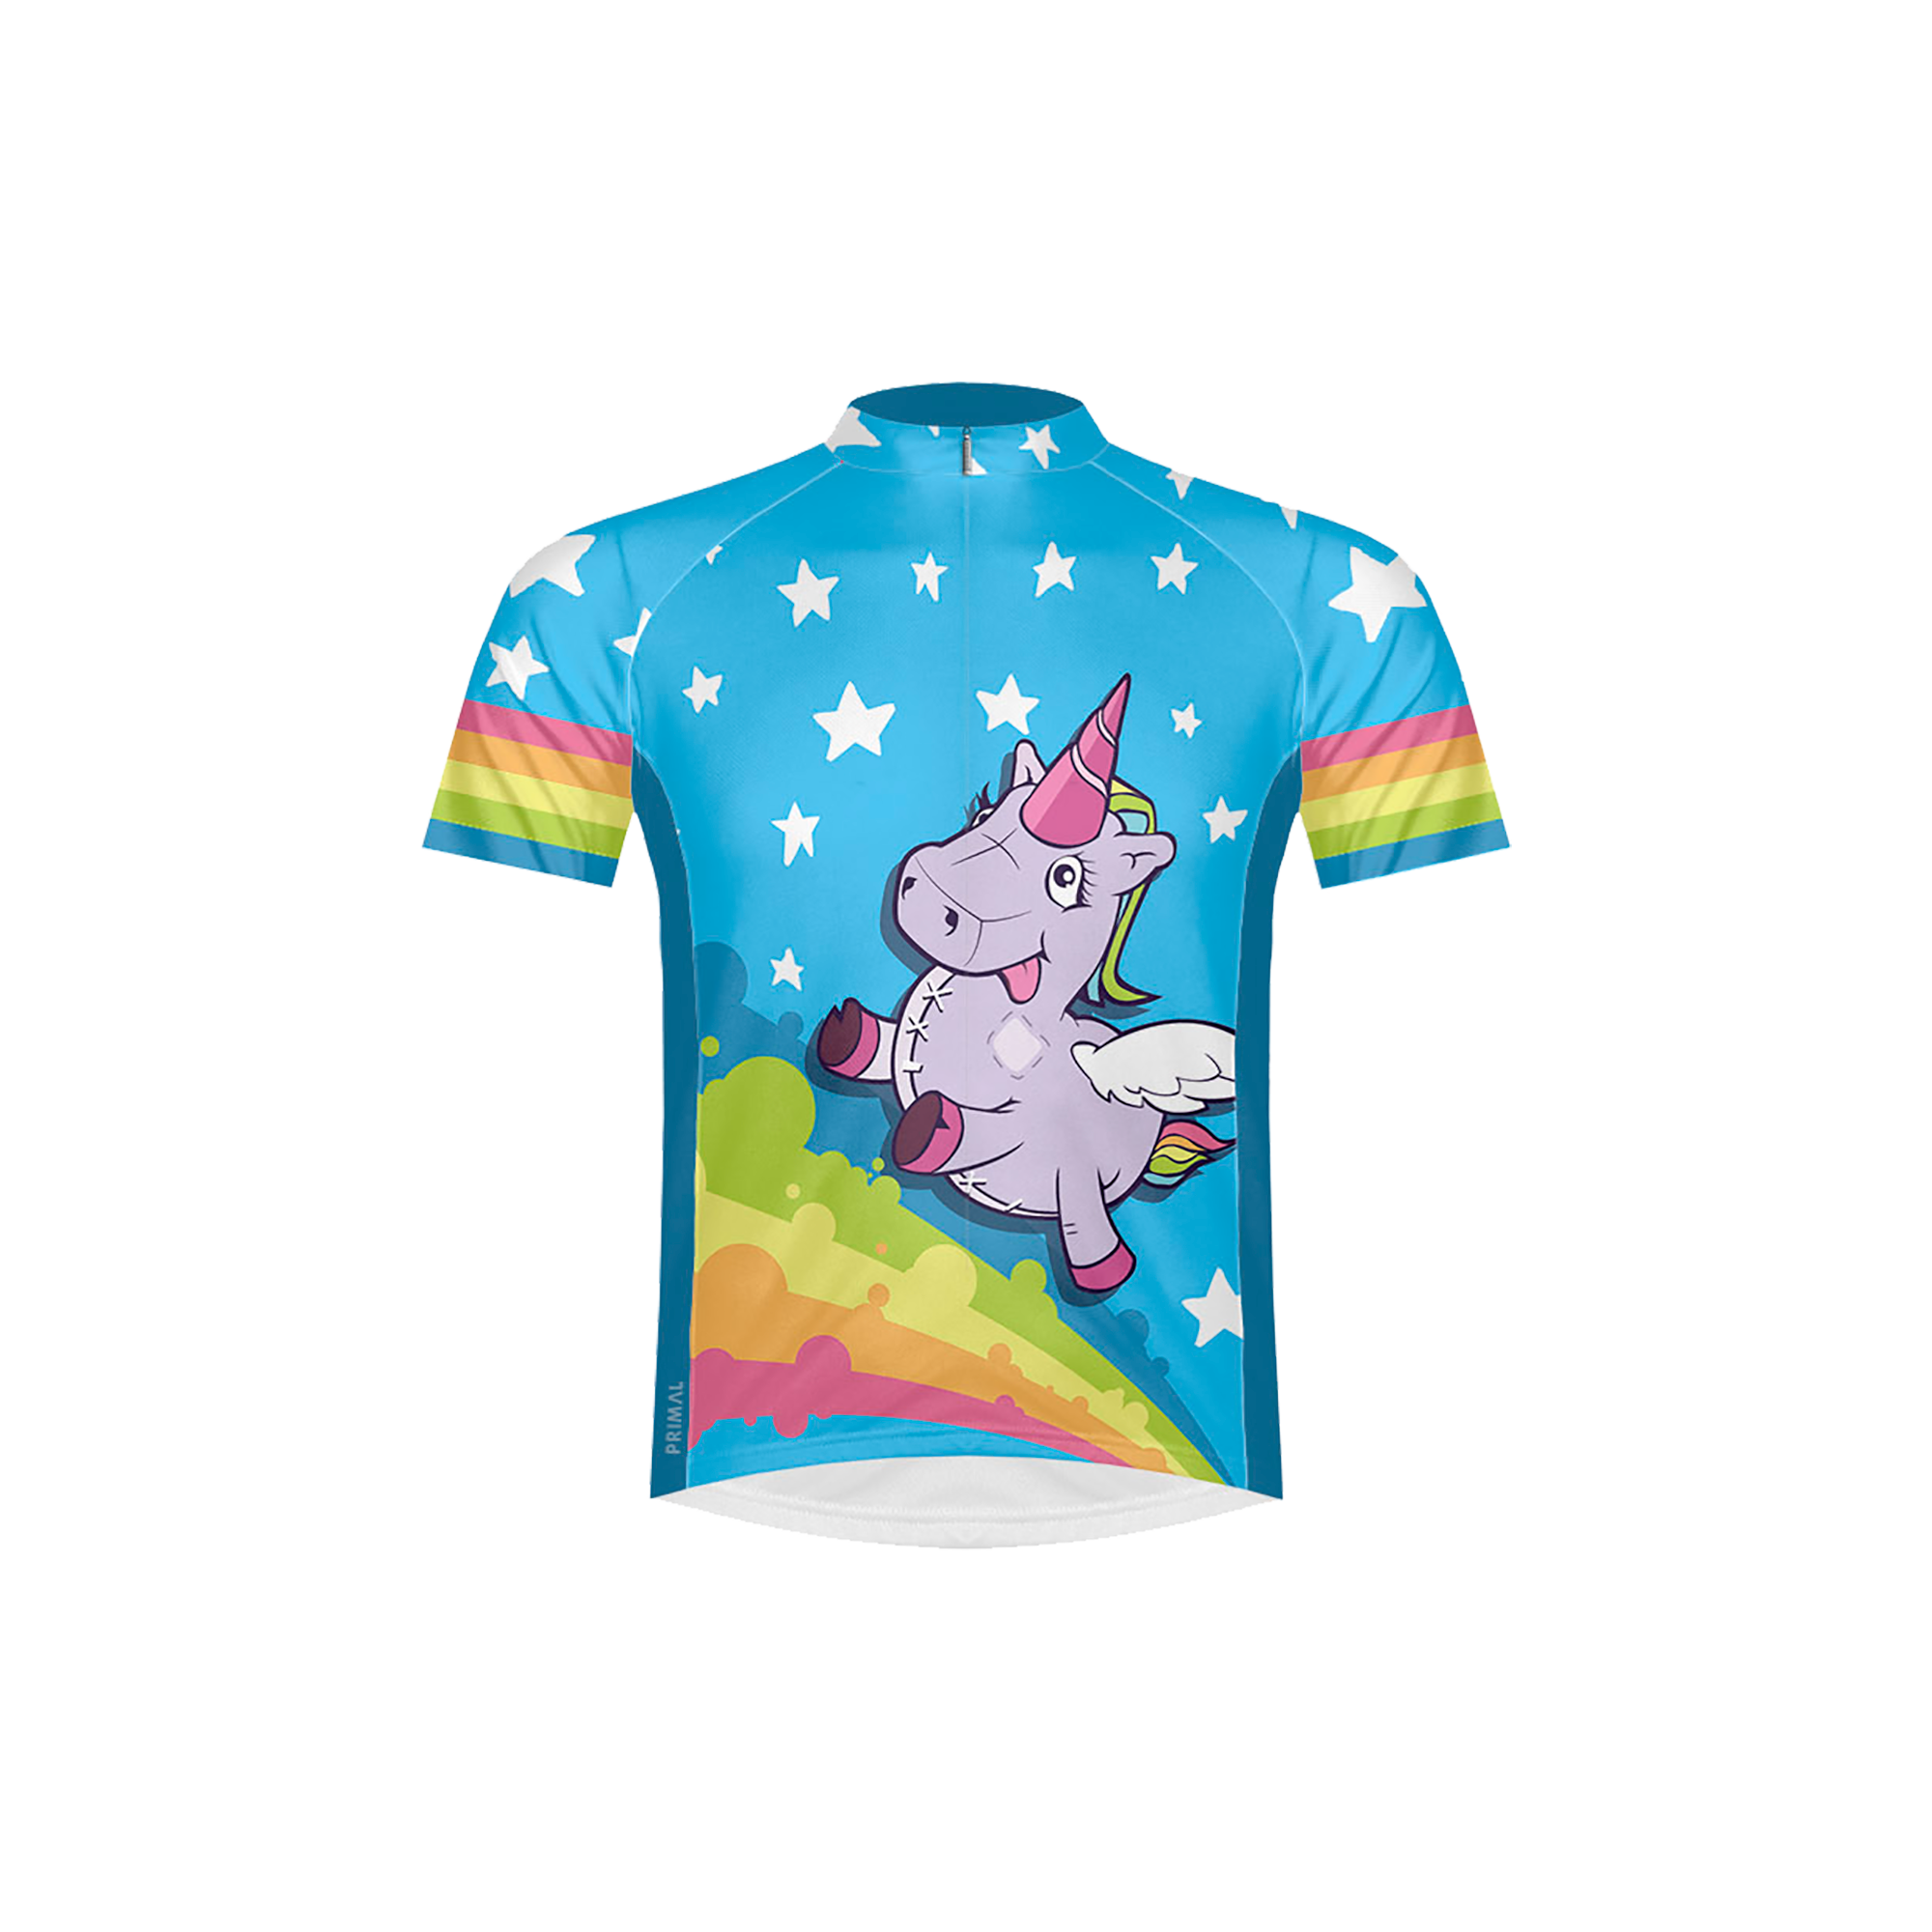 youth cycling jersey